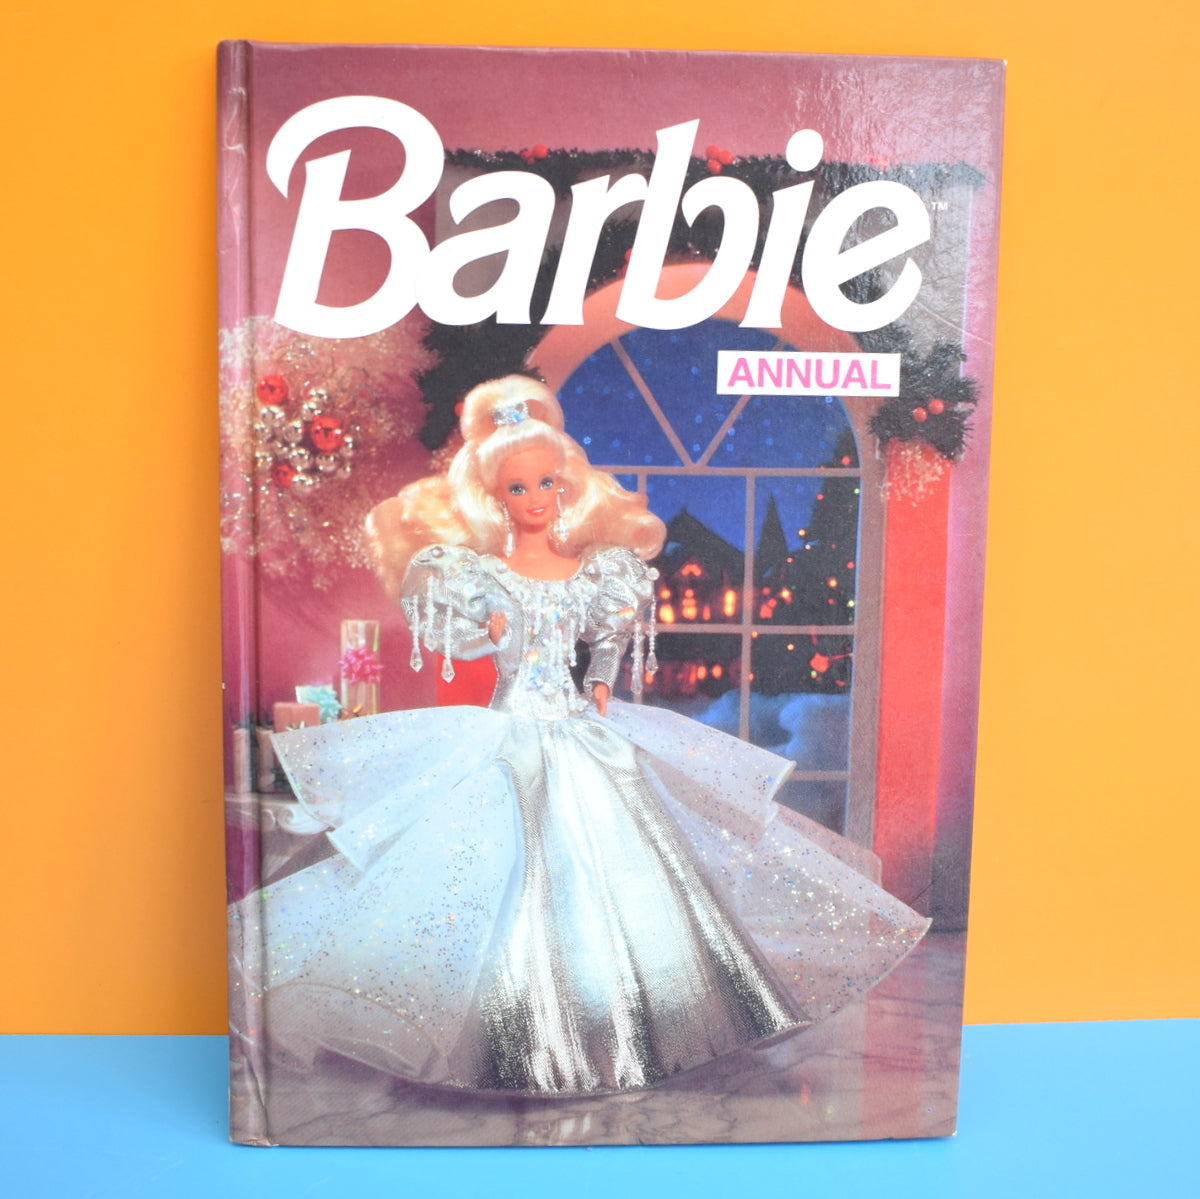 Vintage 1990s Barbie Doll Annual / Books / Notelets